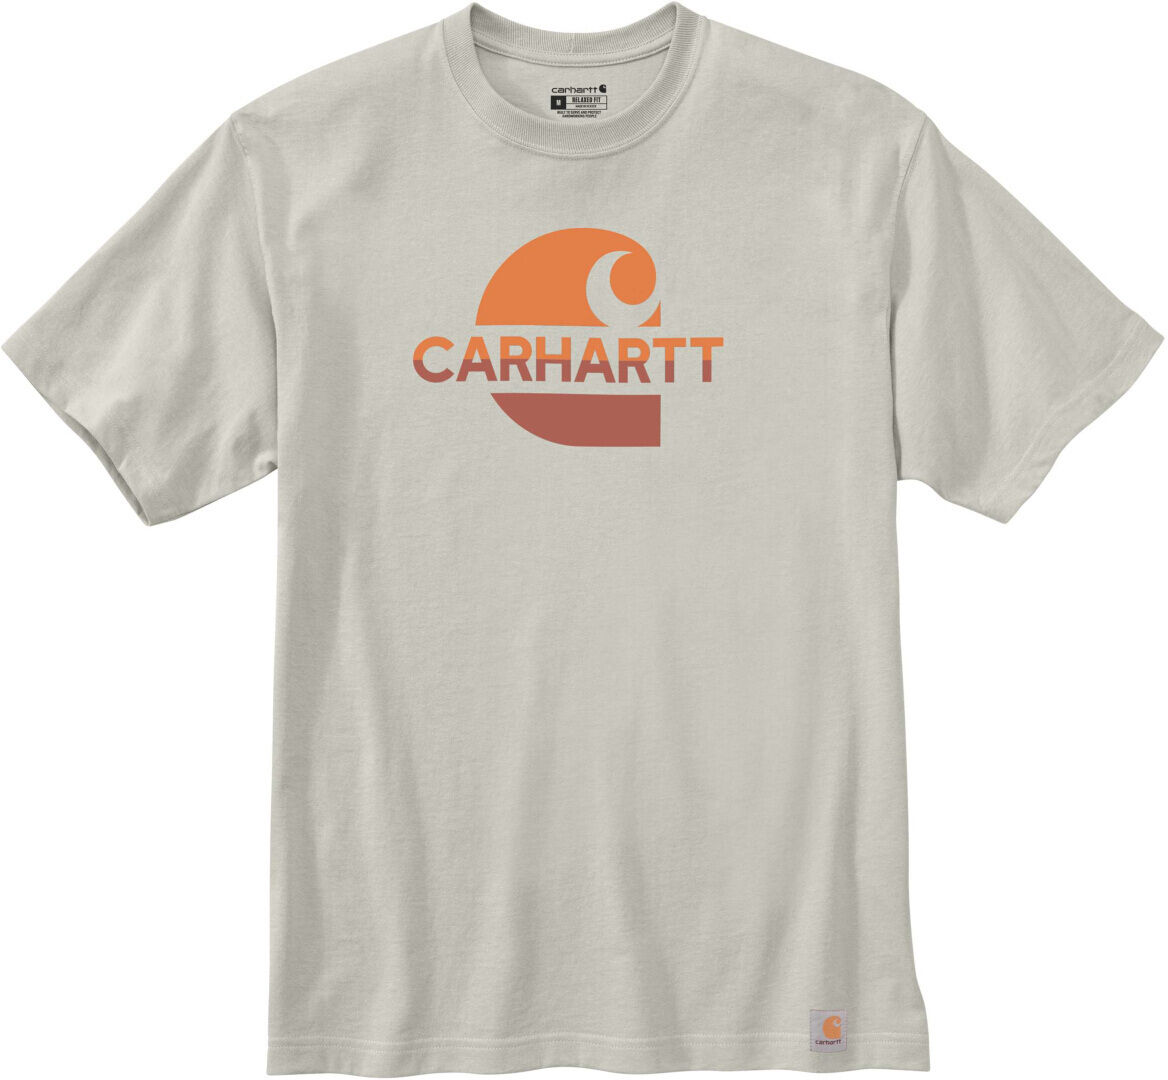 Carhartt Relaxed Fit Heavyweight C Graphic Camiseta - Beige (S)